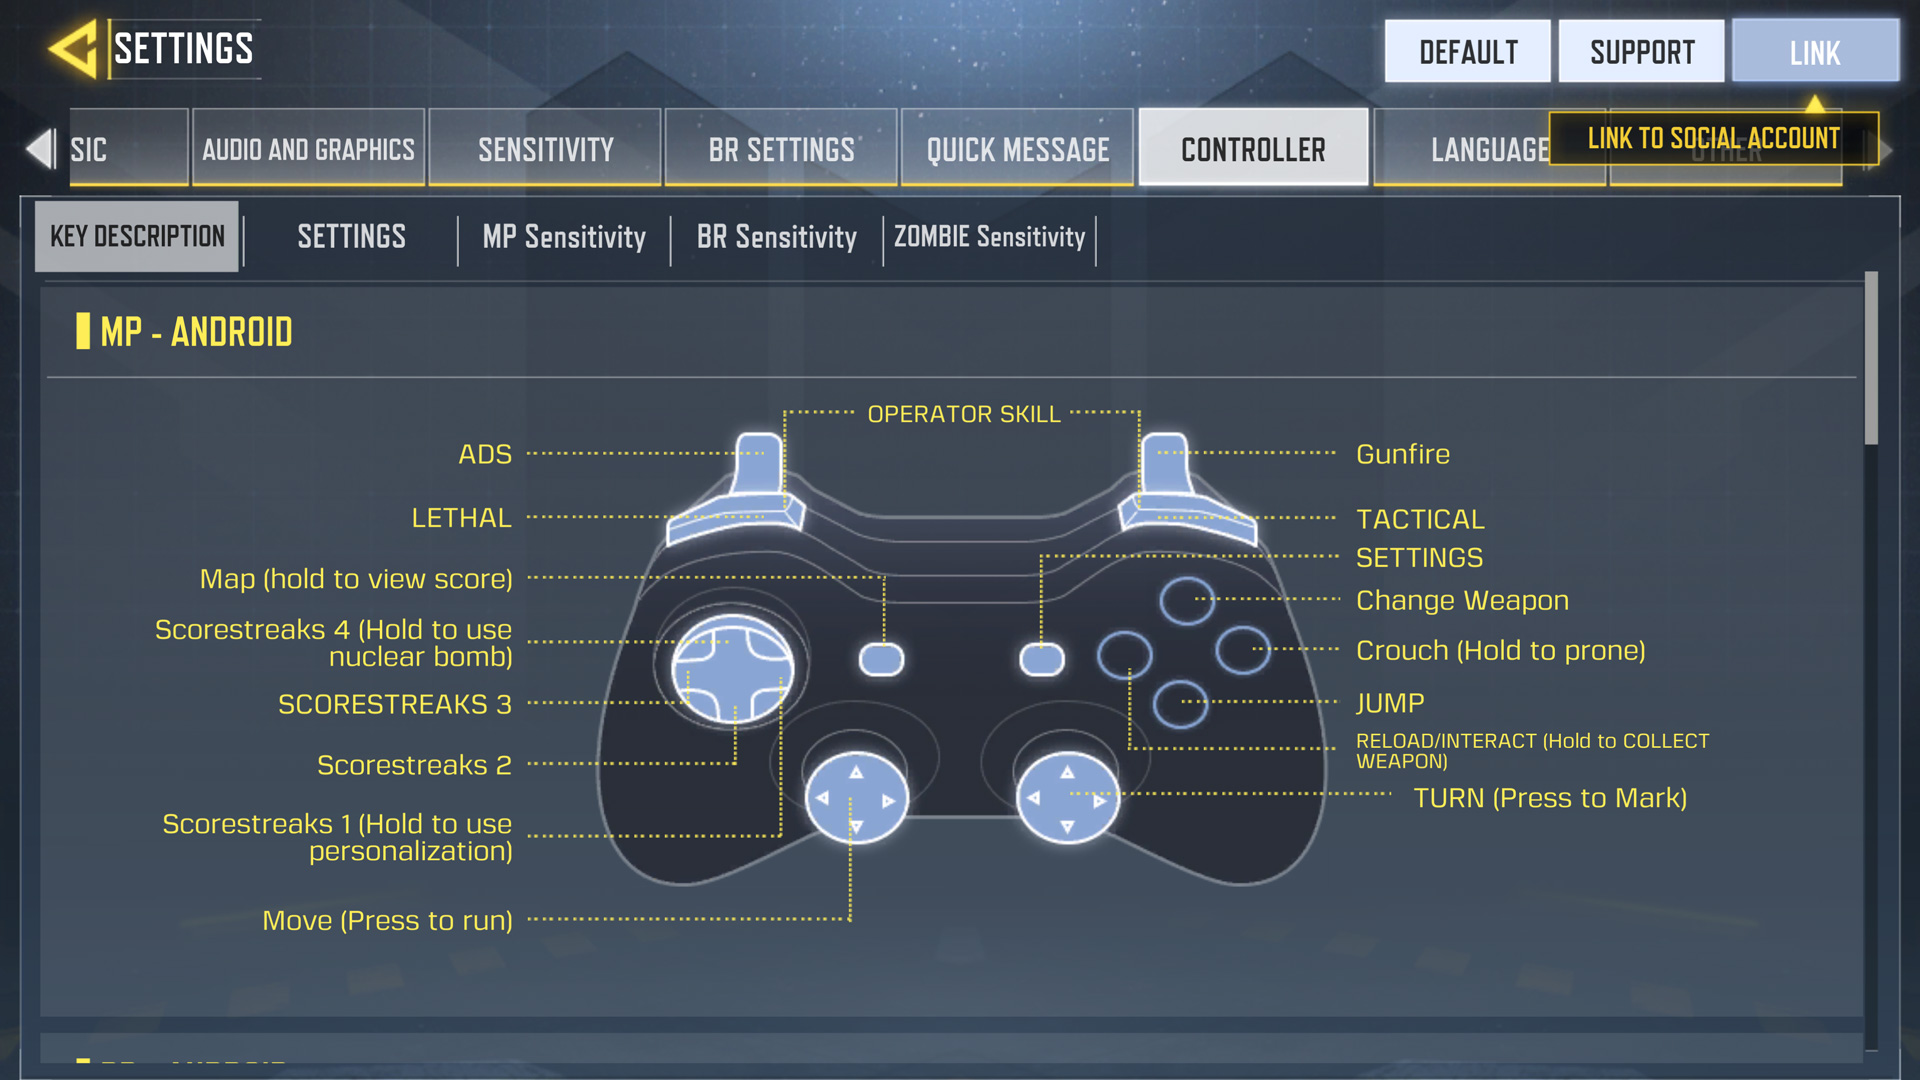 Best Settings for COD Mobile ☆ Play Like a Pro Now